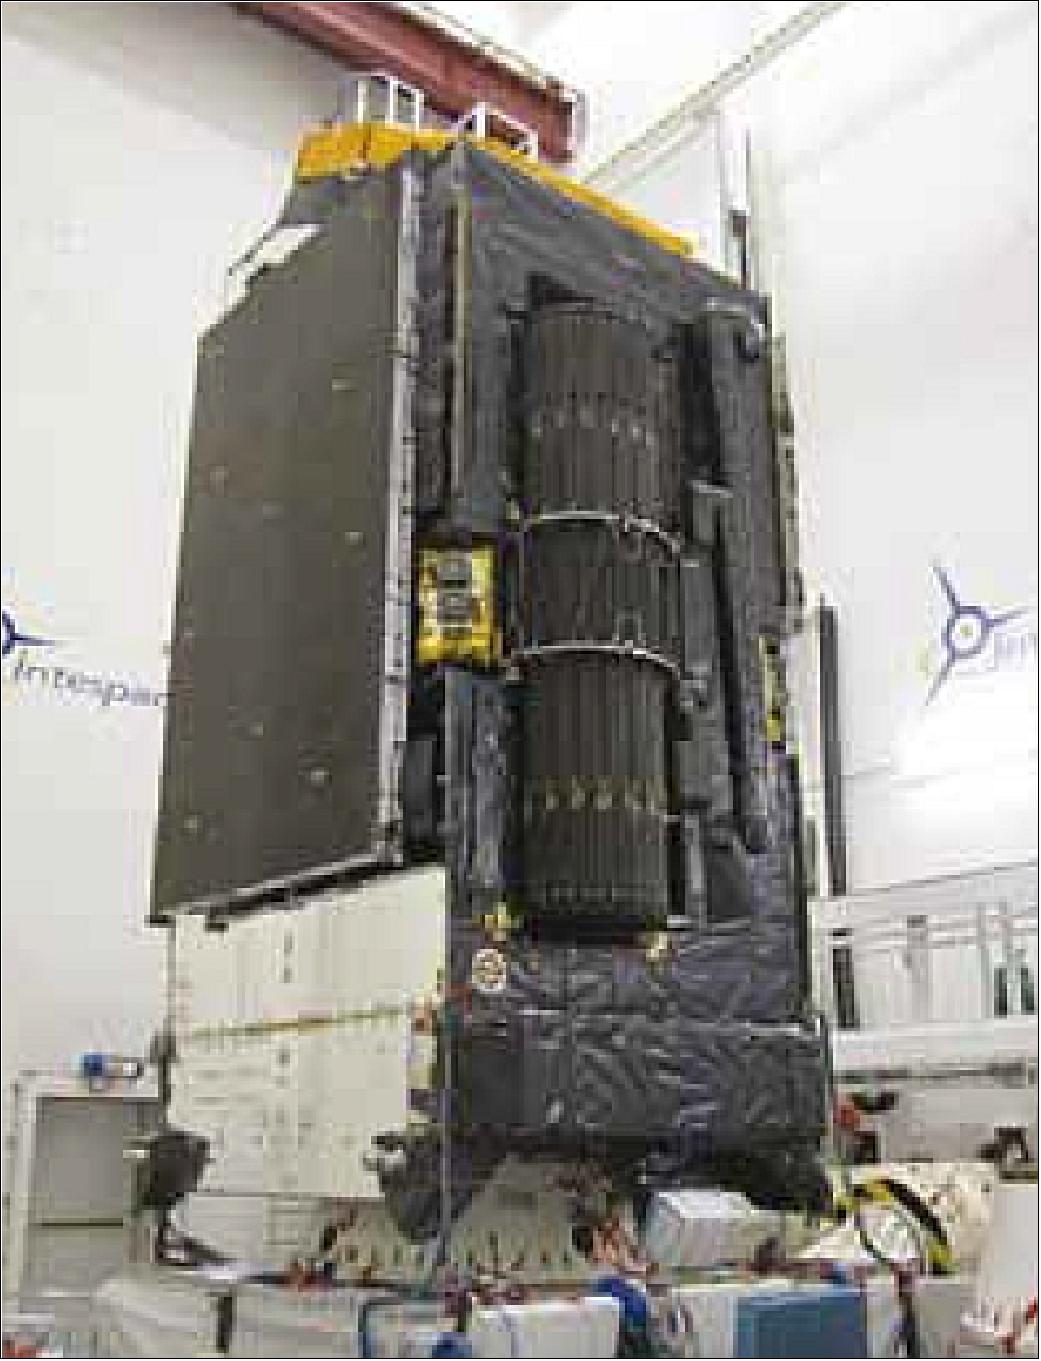 Figure 10: Photo of Alphasat after the mechanical test campaign in August 2011 (image credit: ESA)